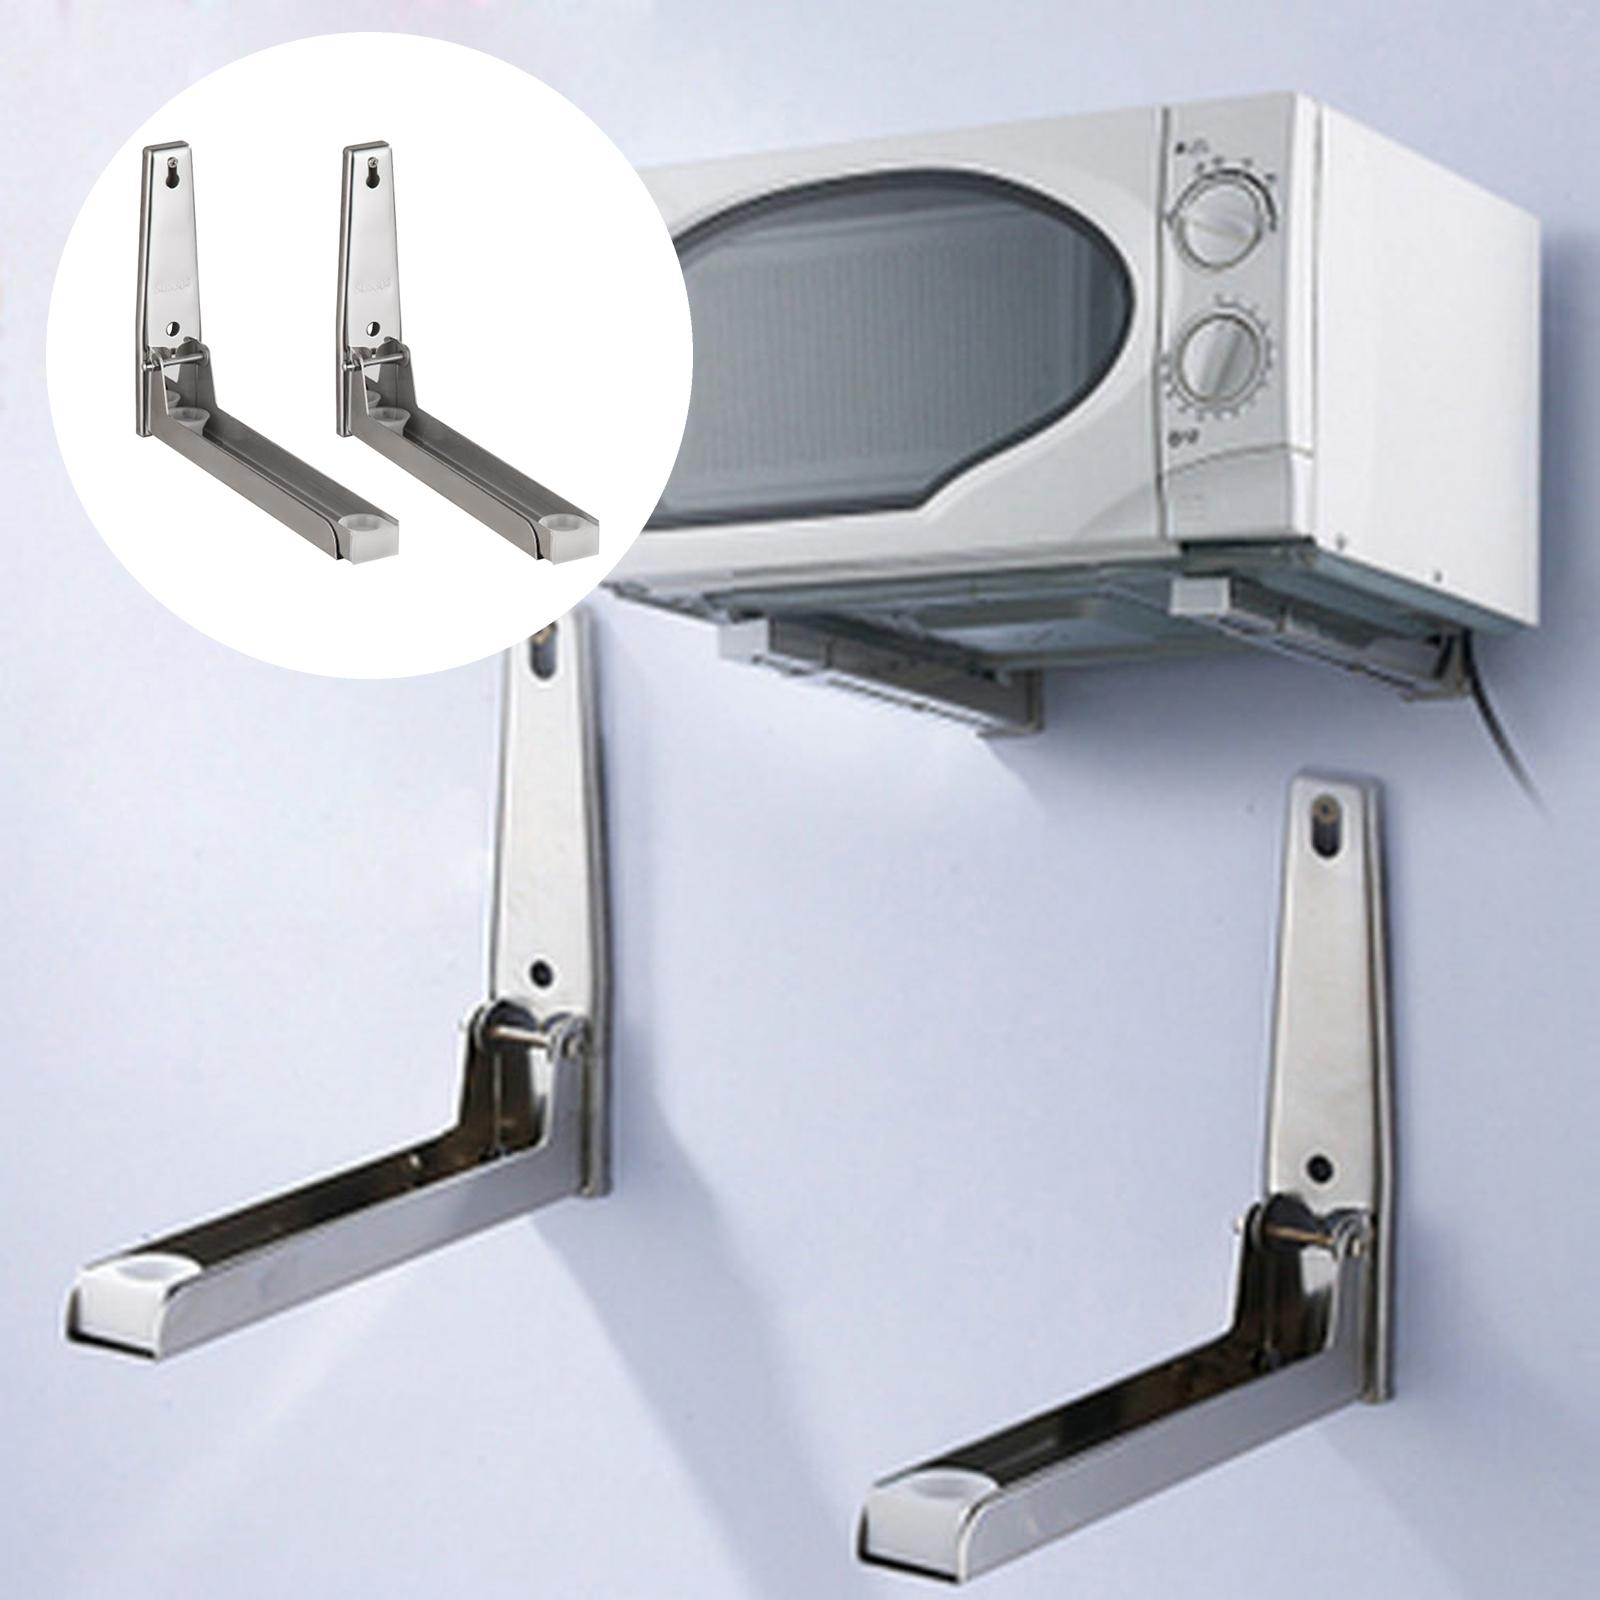 Microwave Mount Bracket Adjustable Foldable for Kitchen 304 Stainless Steel 